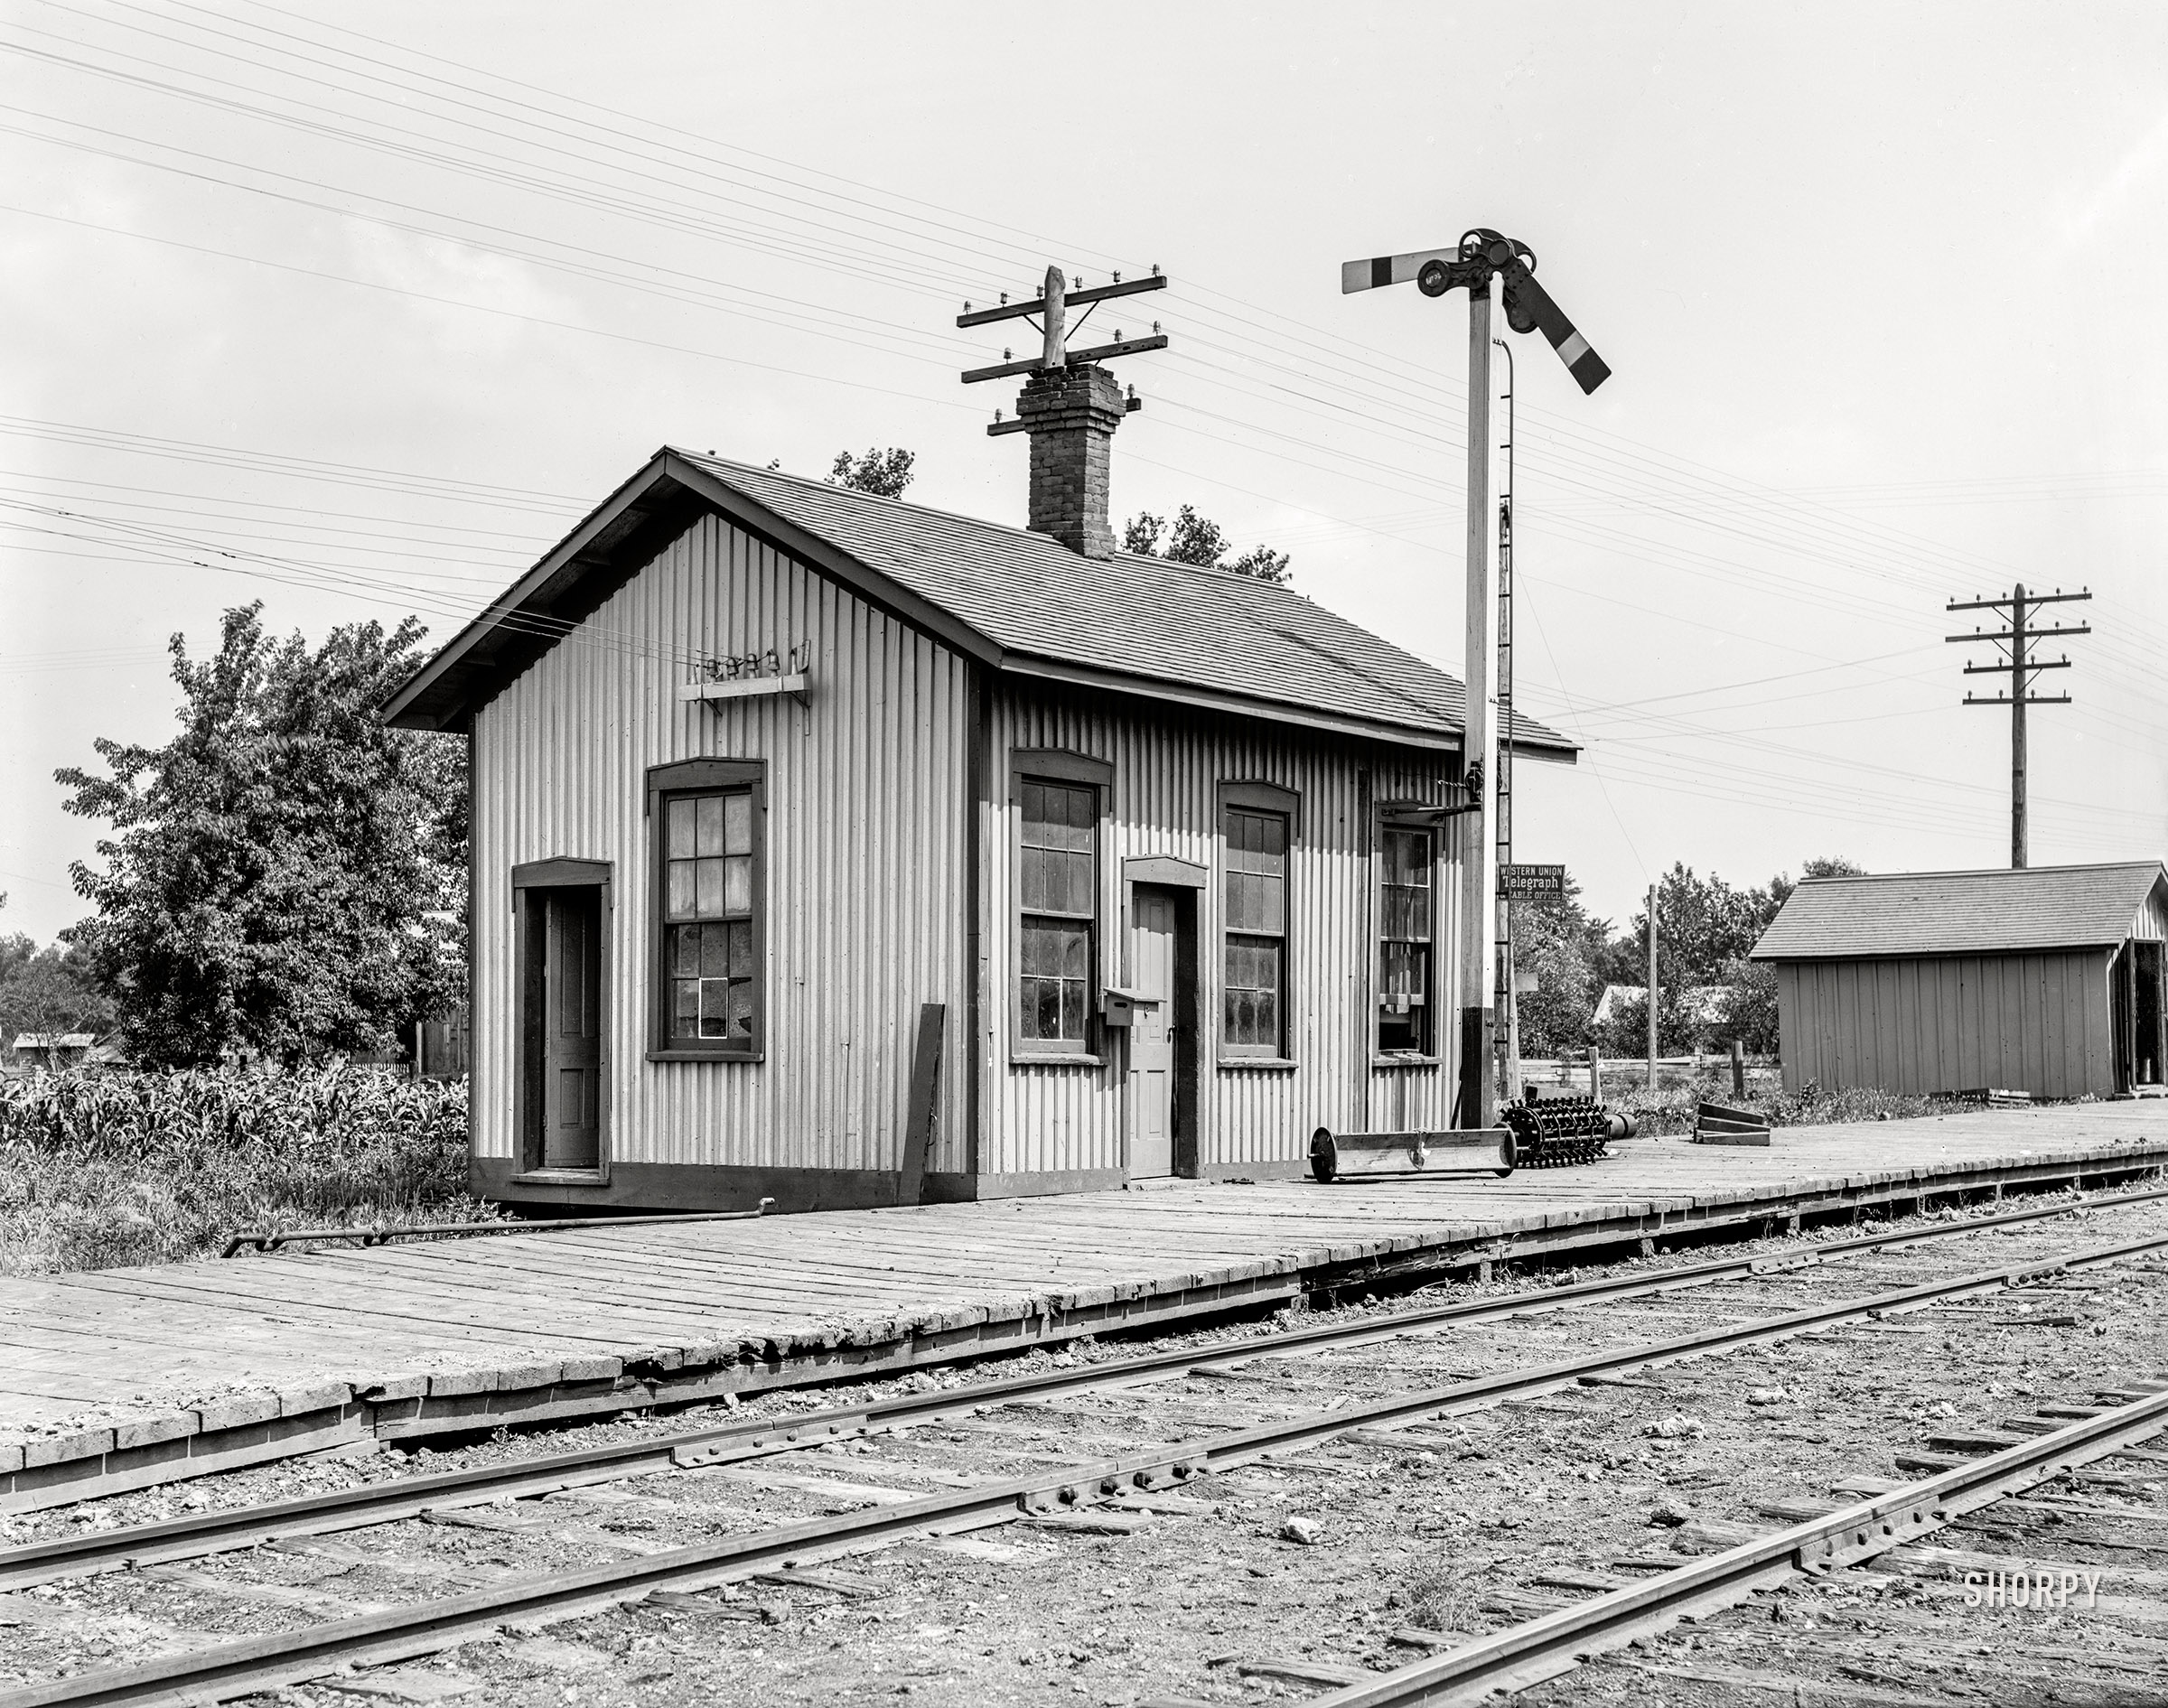 Circa 1901. "Station at Cayuga, Ill's." 8x10 inch dry plate glass negative, Detroit Photographic Company. View full size.